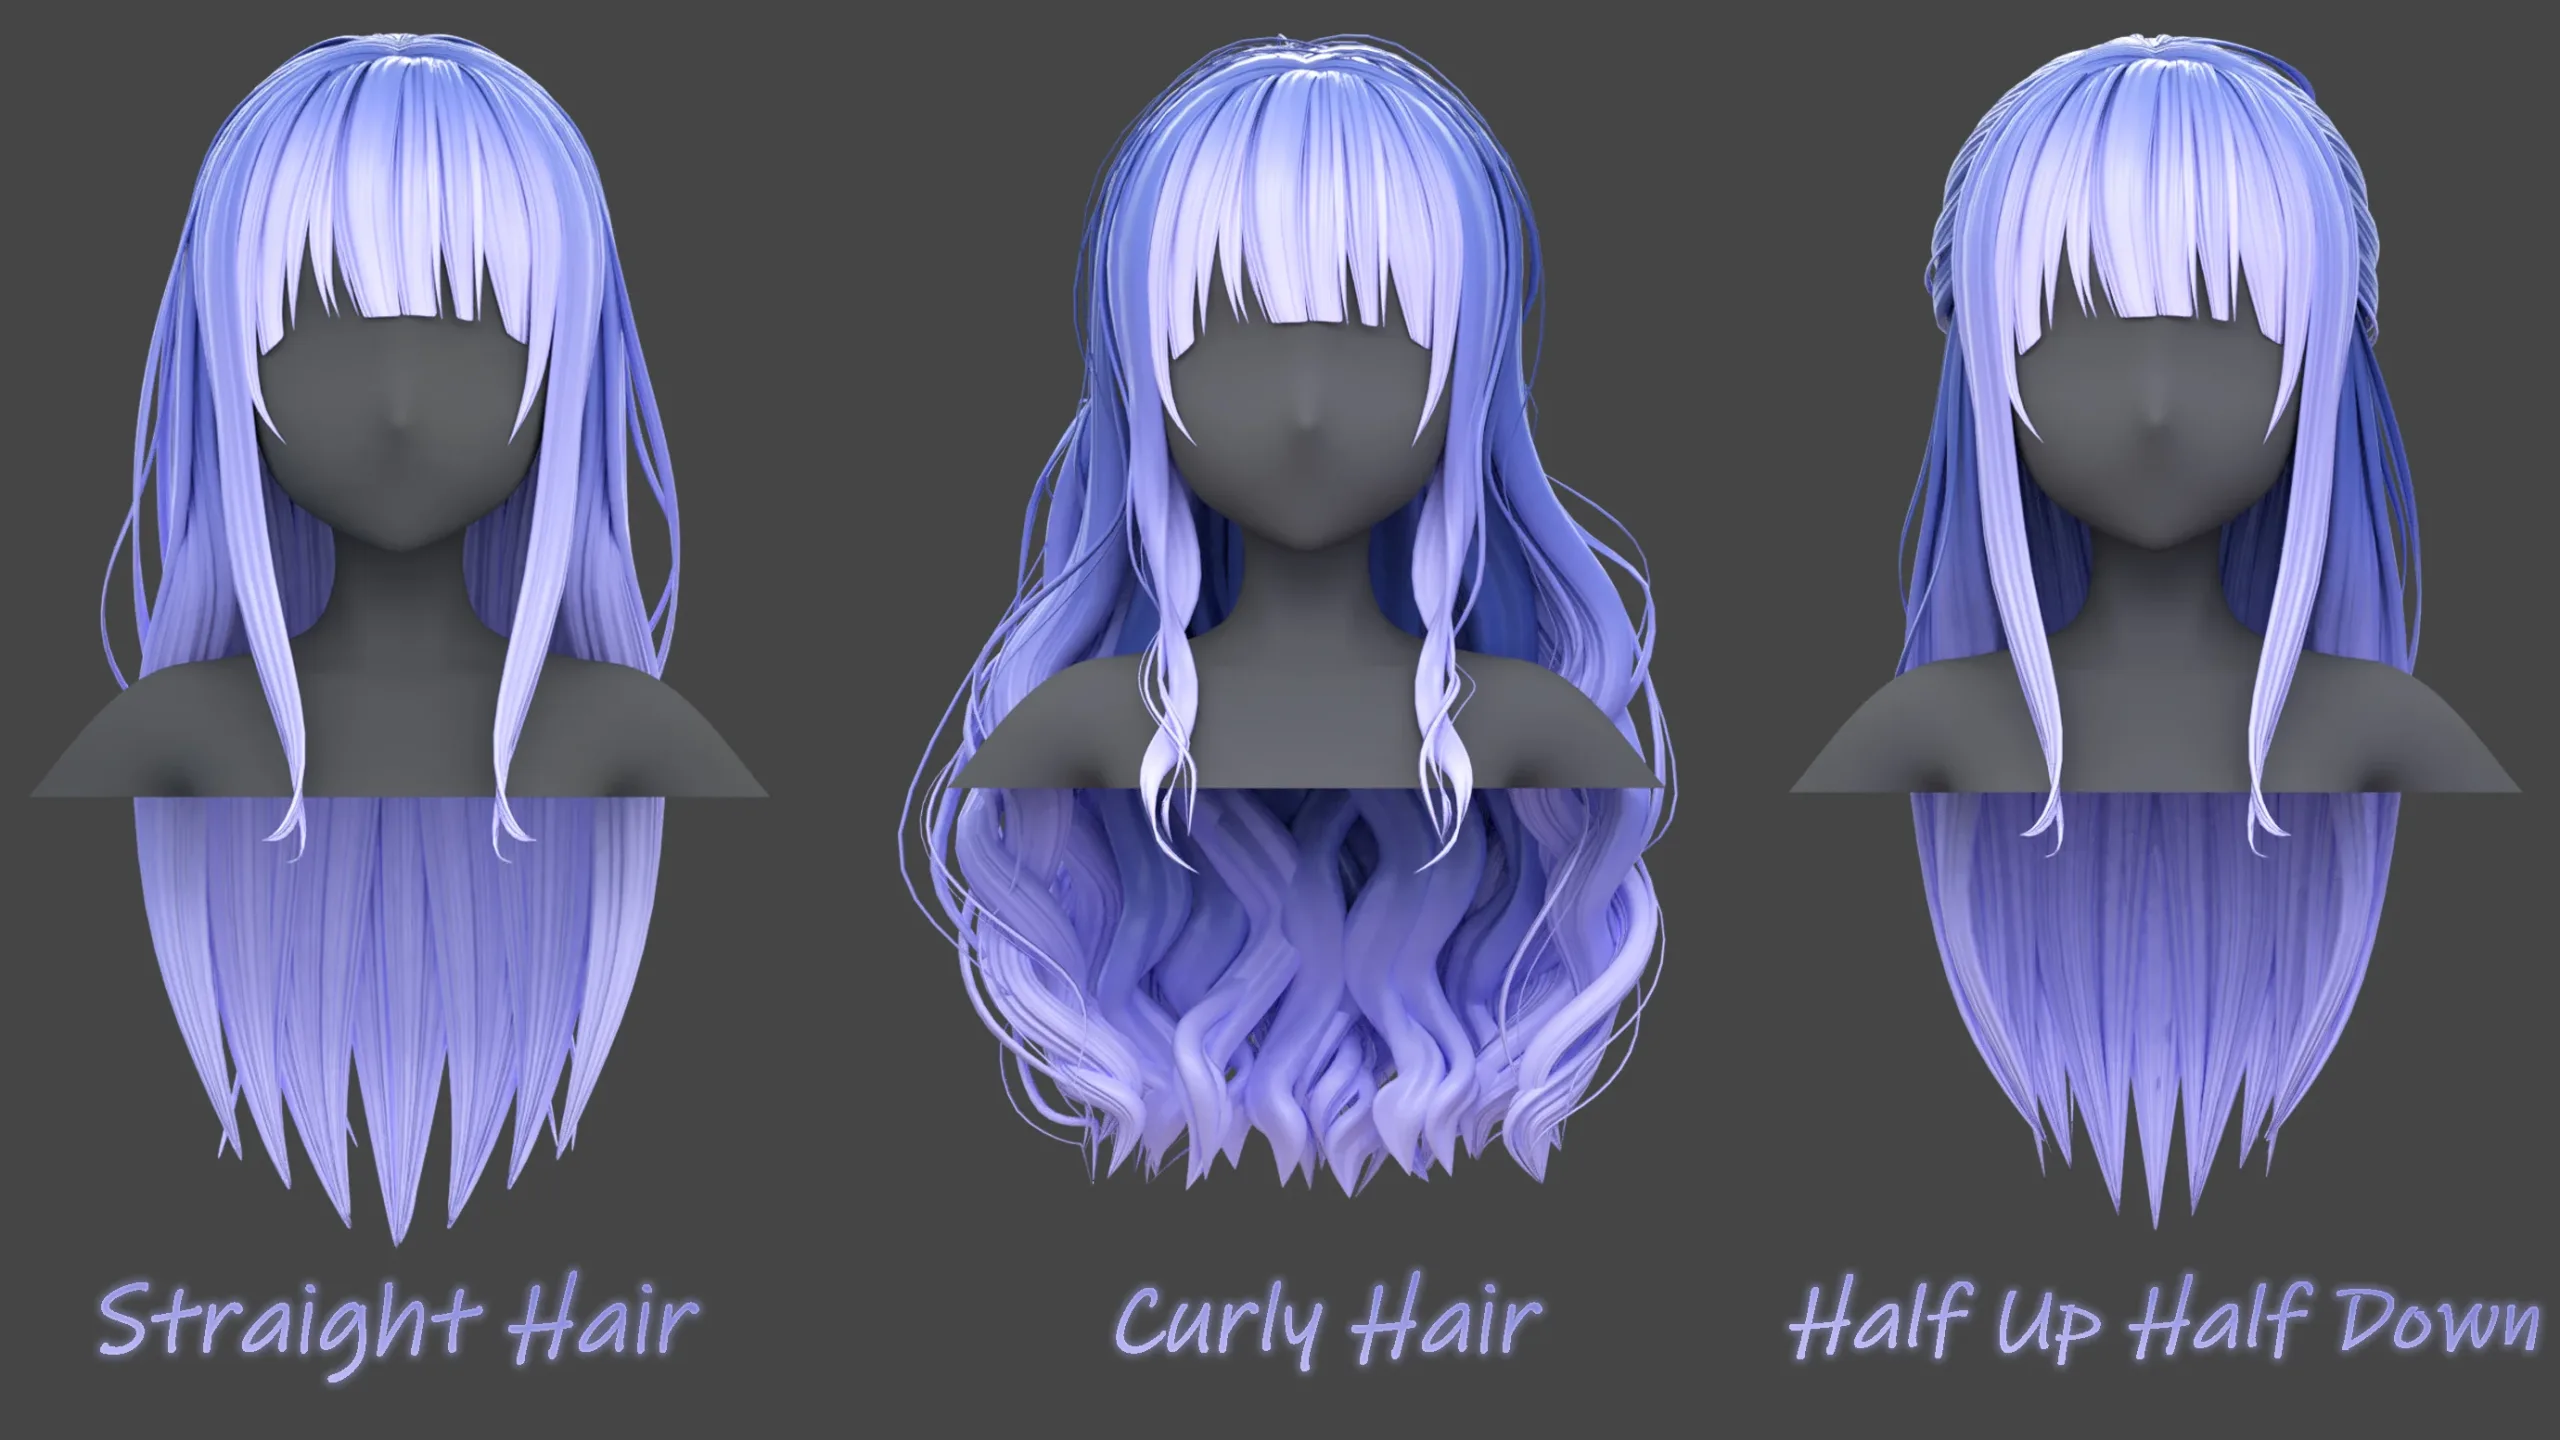 Poly Hairstyle pack-12 types of Hairstyles(obj, fbx, blend files)